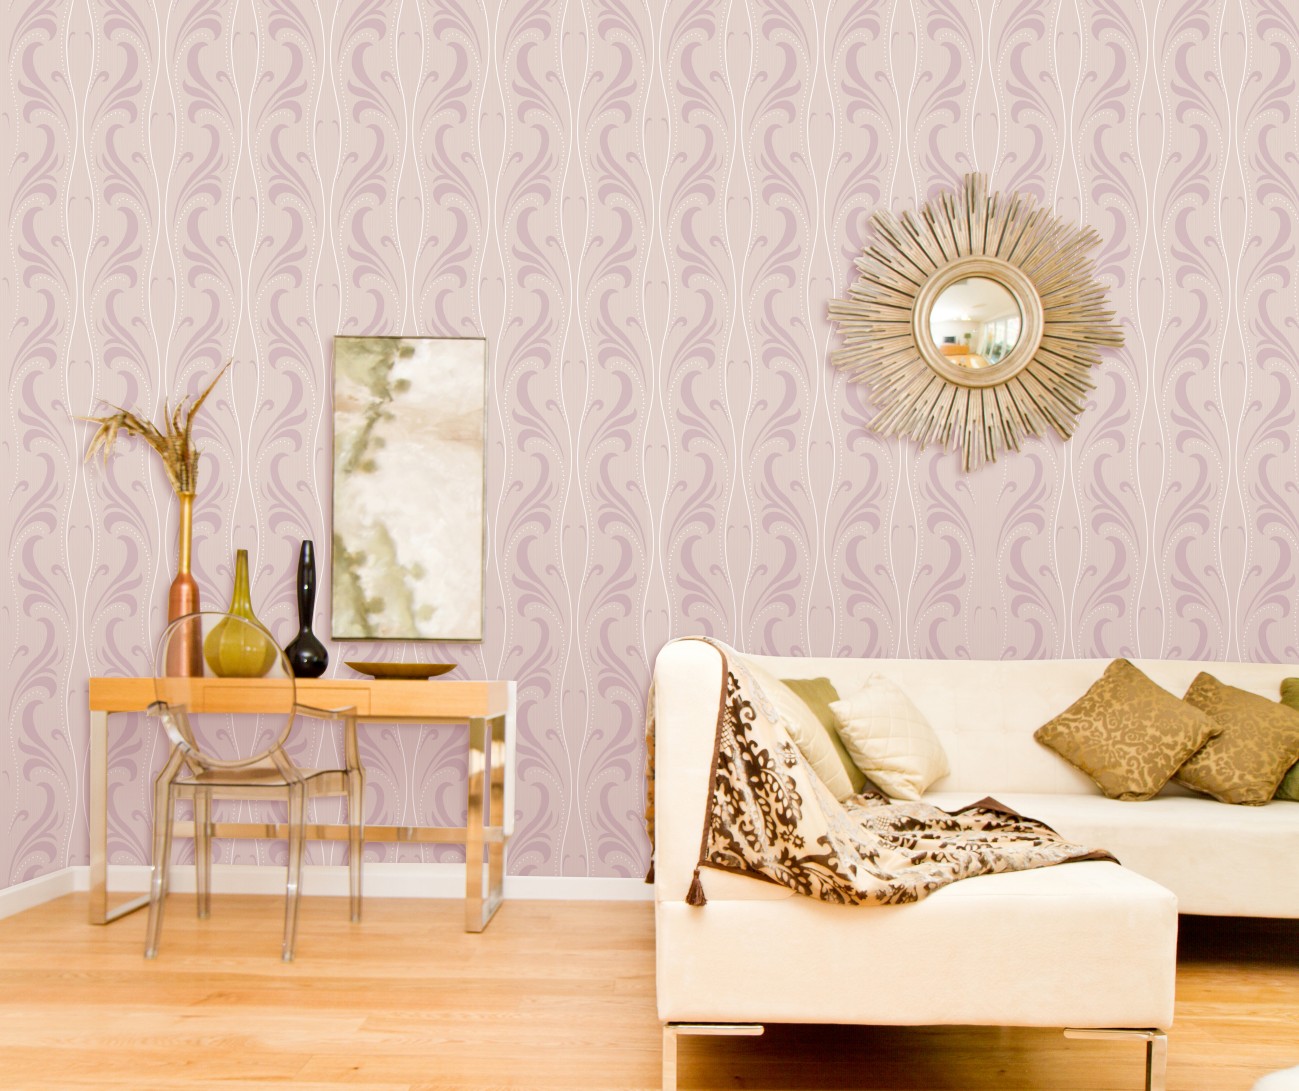 MAGNIFICENT-non-woven foaming sprinkled gold wallpaper